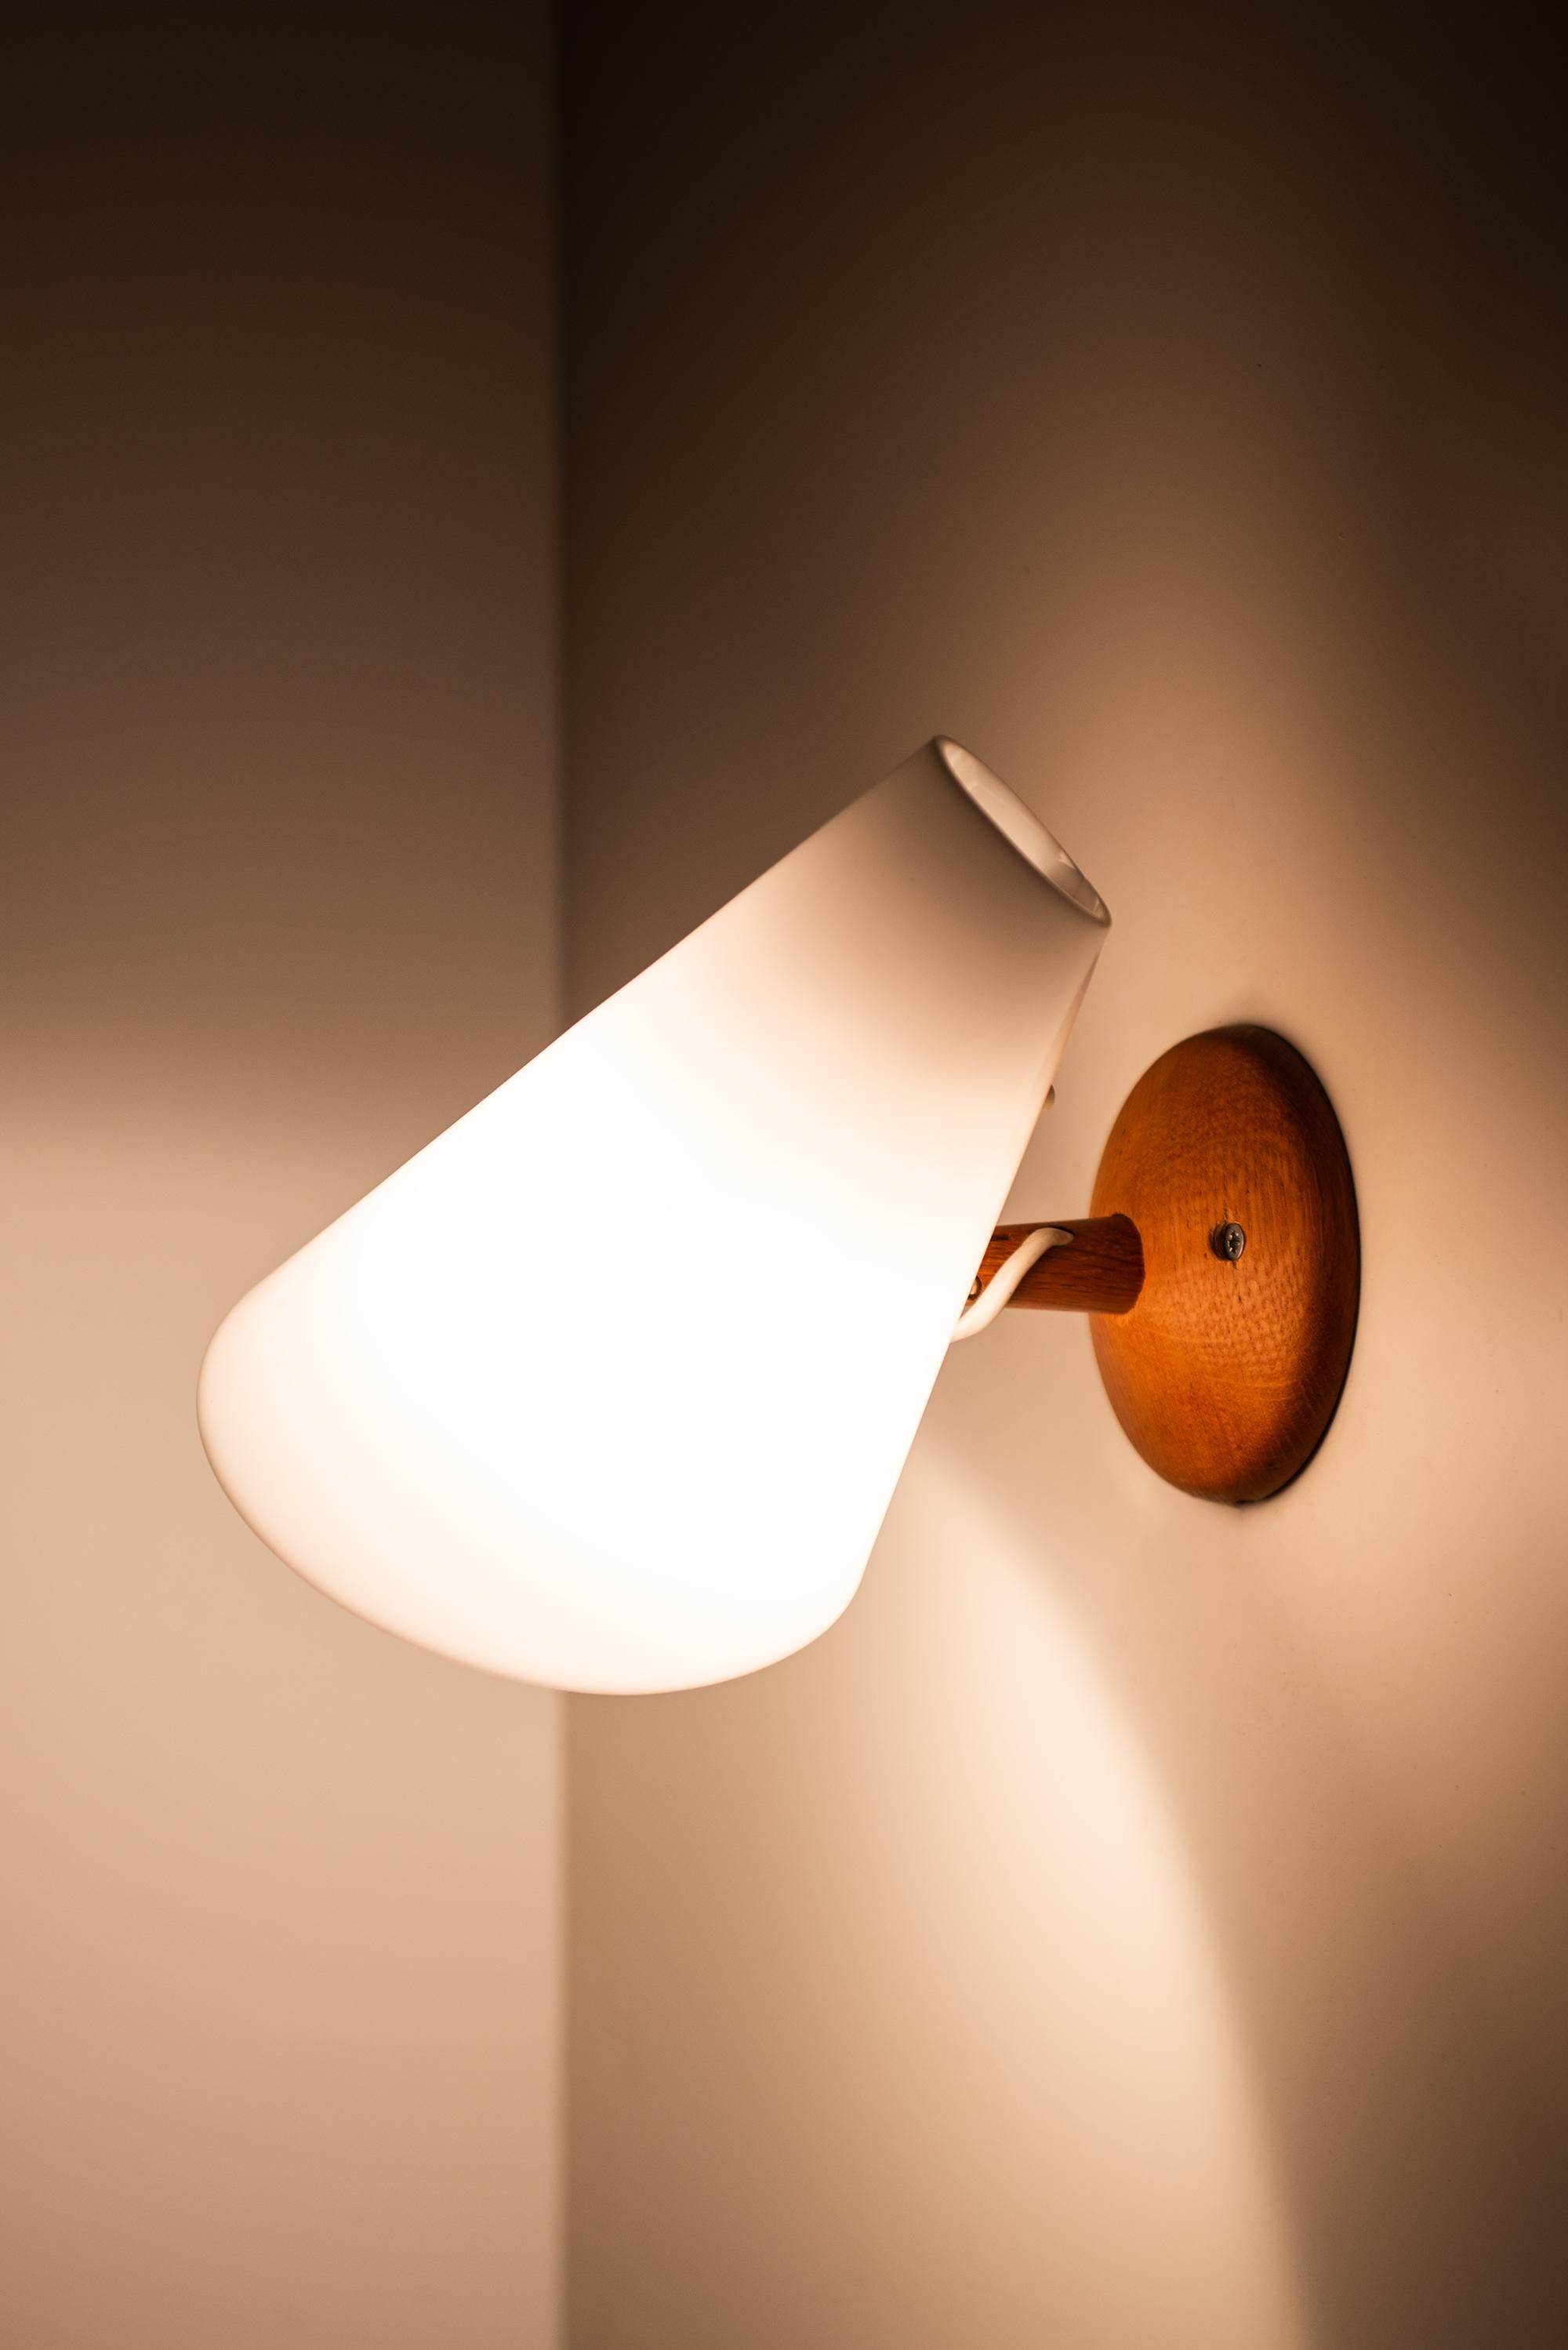 Mid-20th Century Uno & Östen Kristiansson Wall Lamps Produced by Luxus in Vittsjö, Sweden For Sale